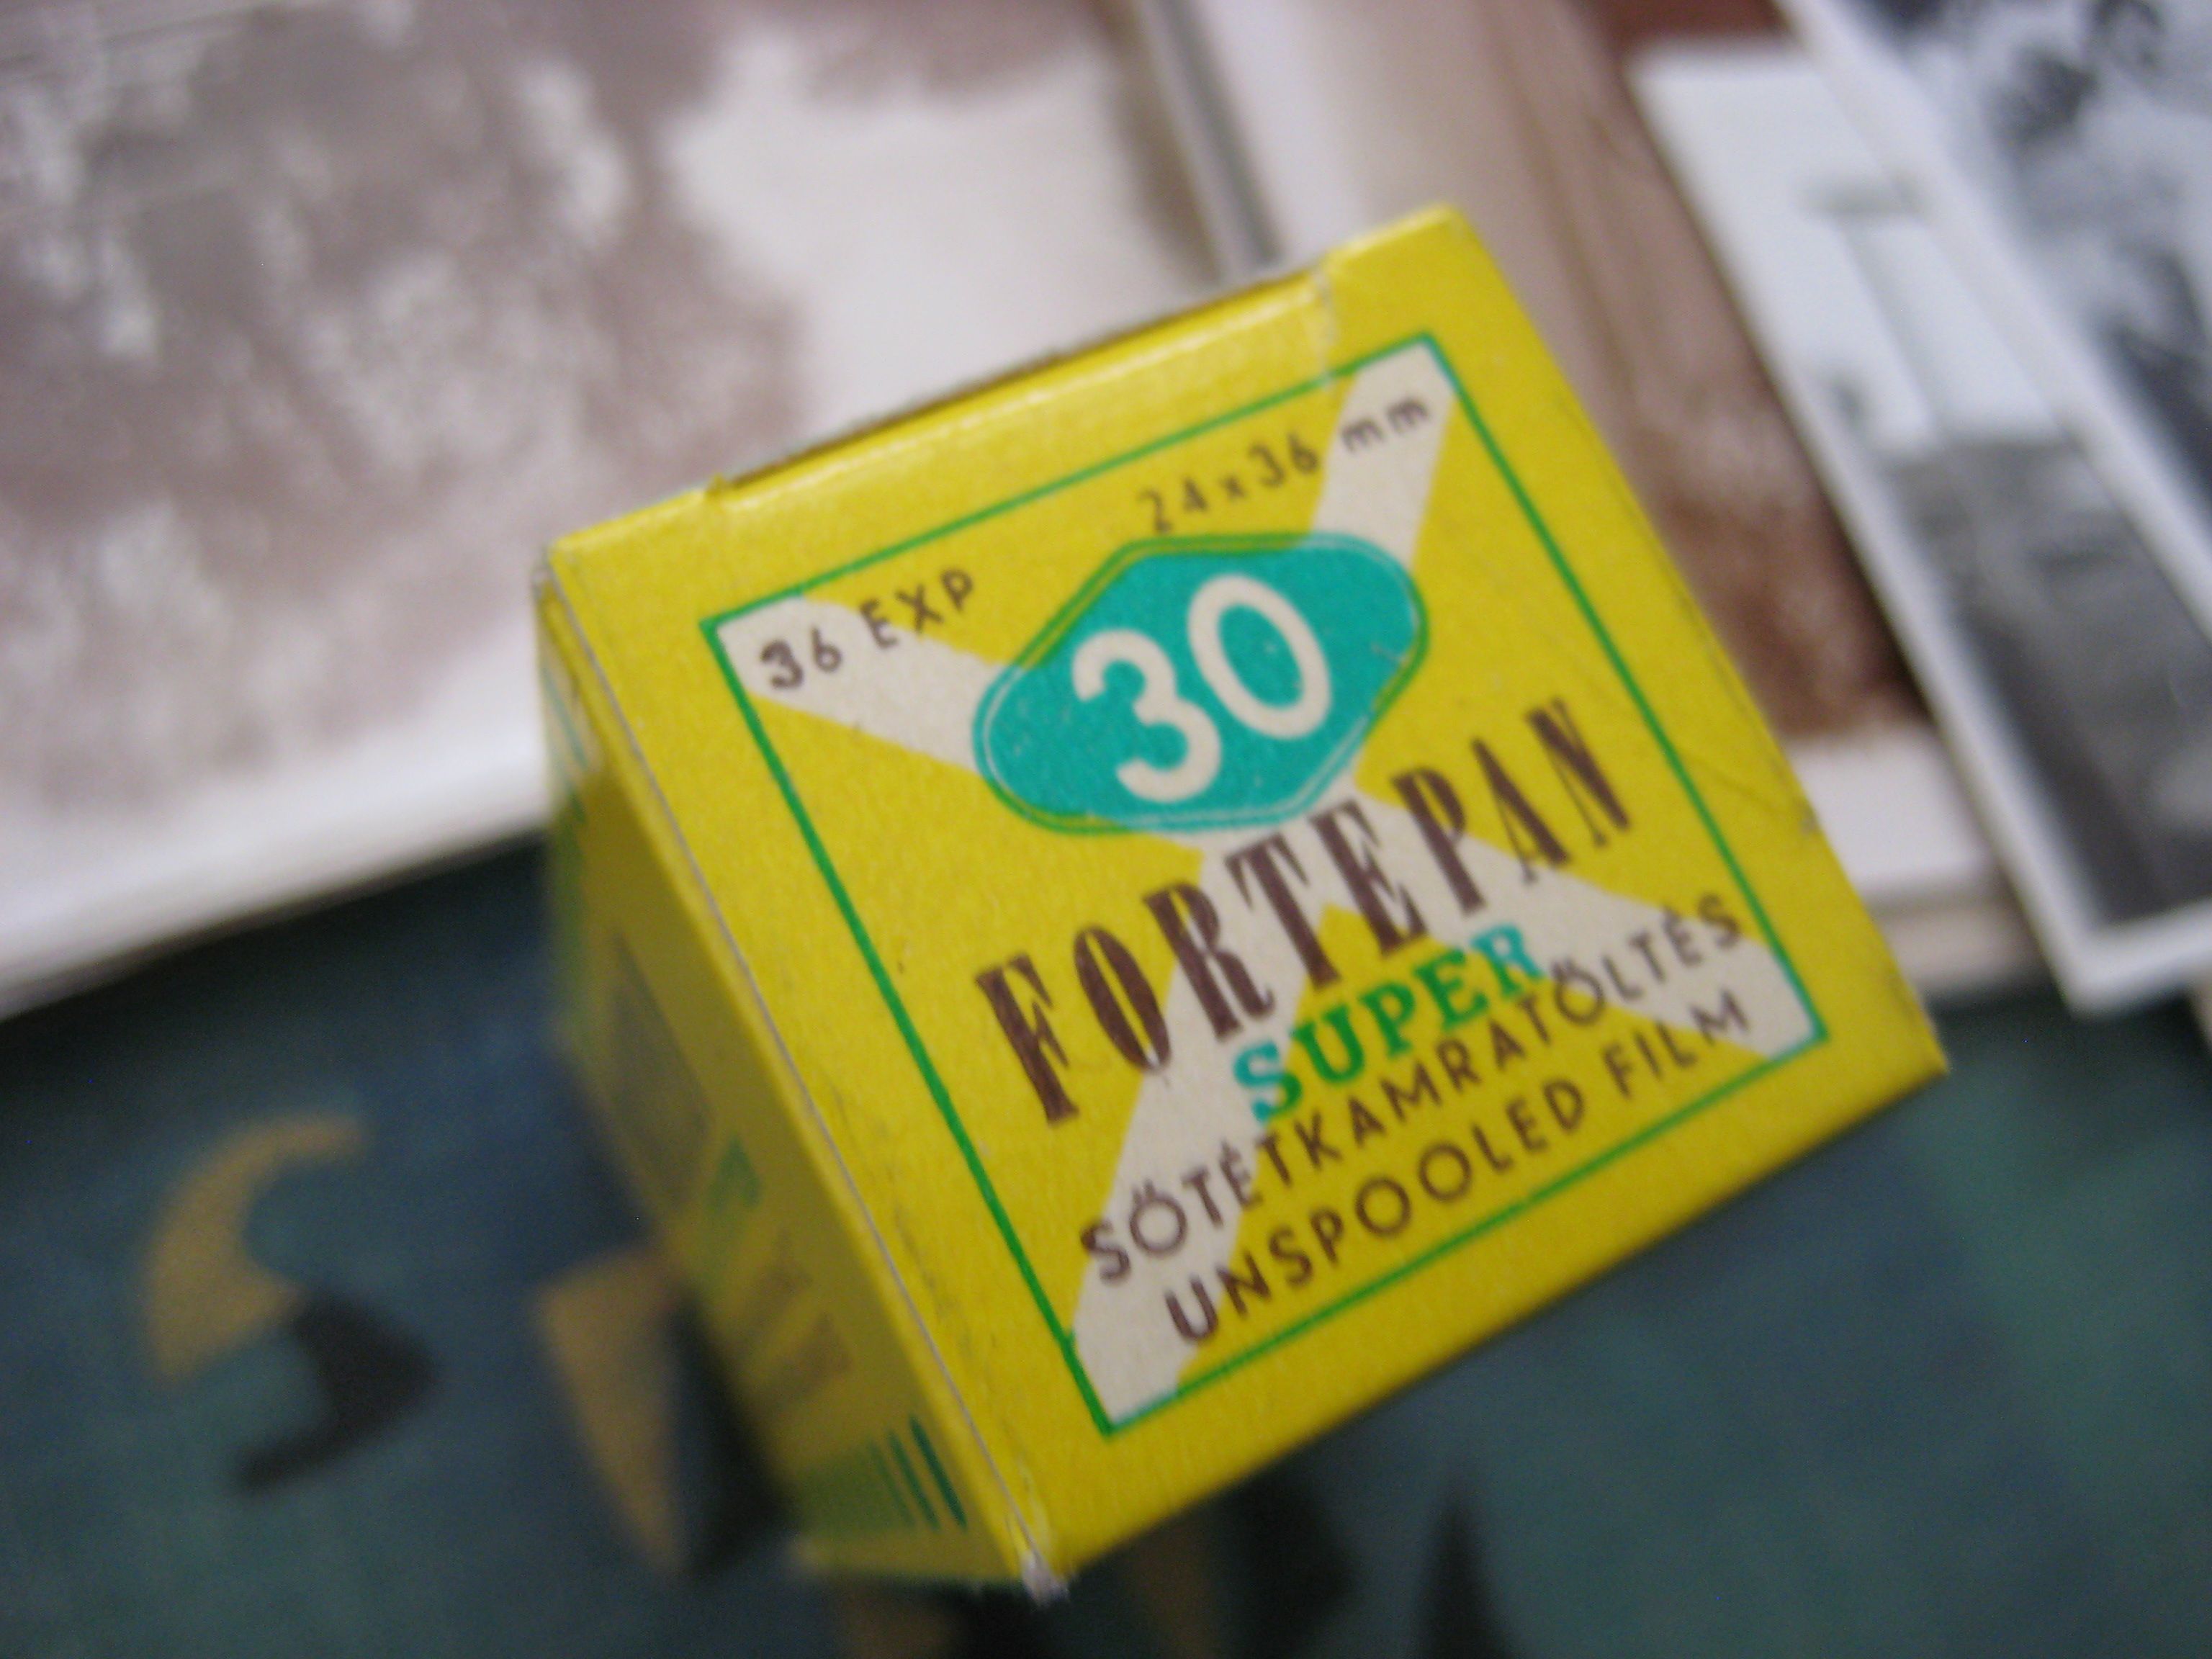 Fortepan film, product of Forte factory